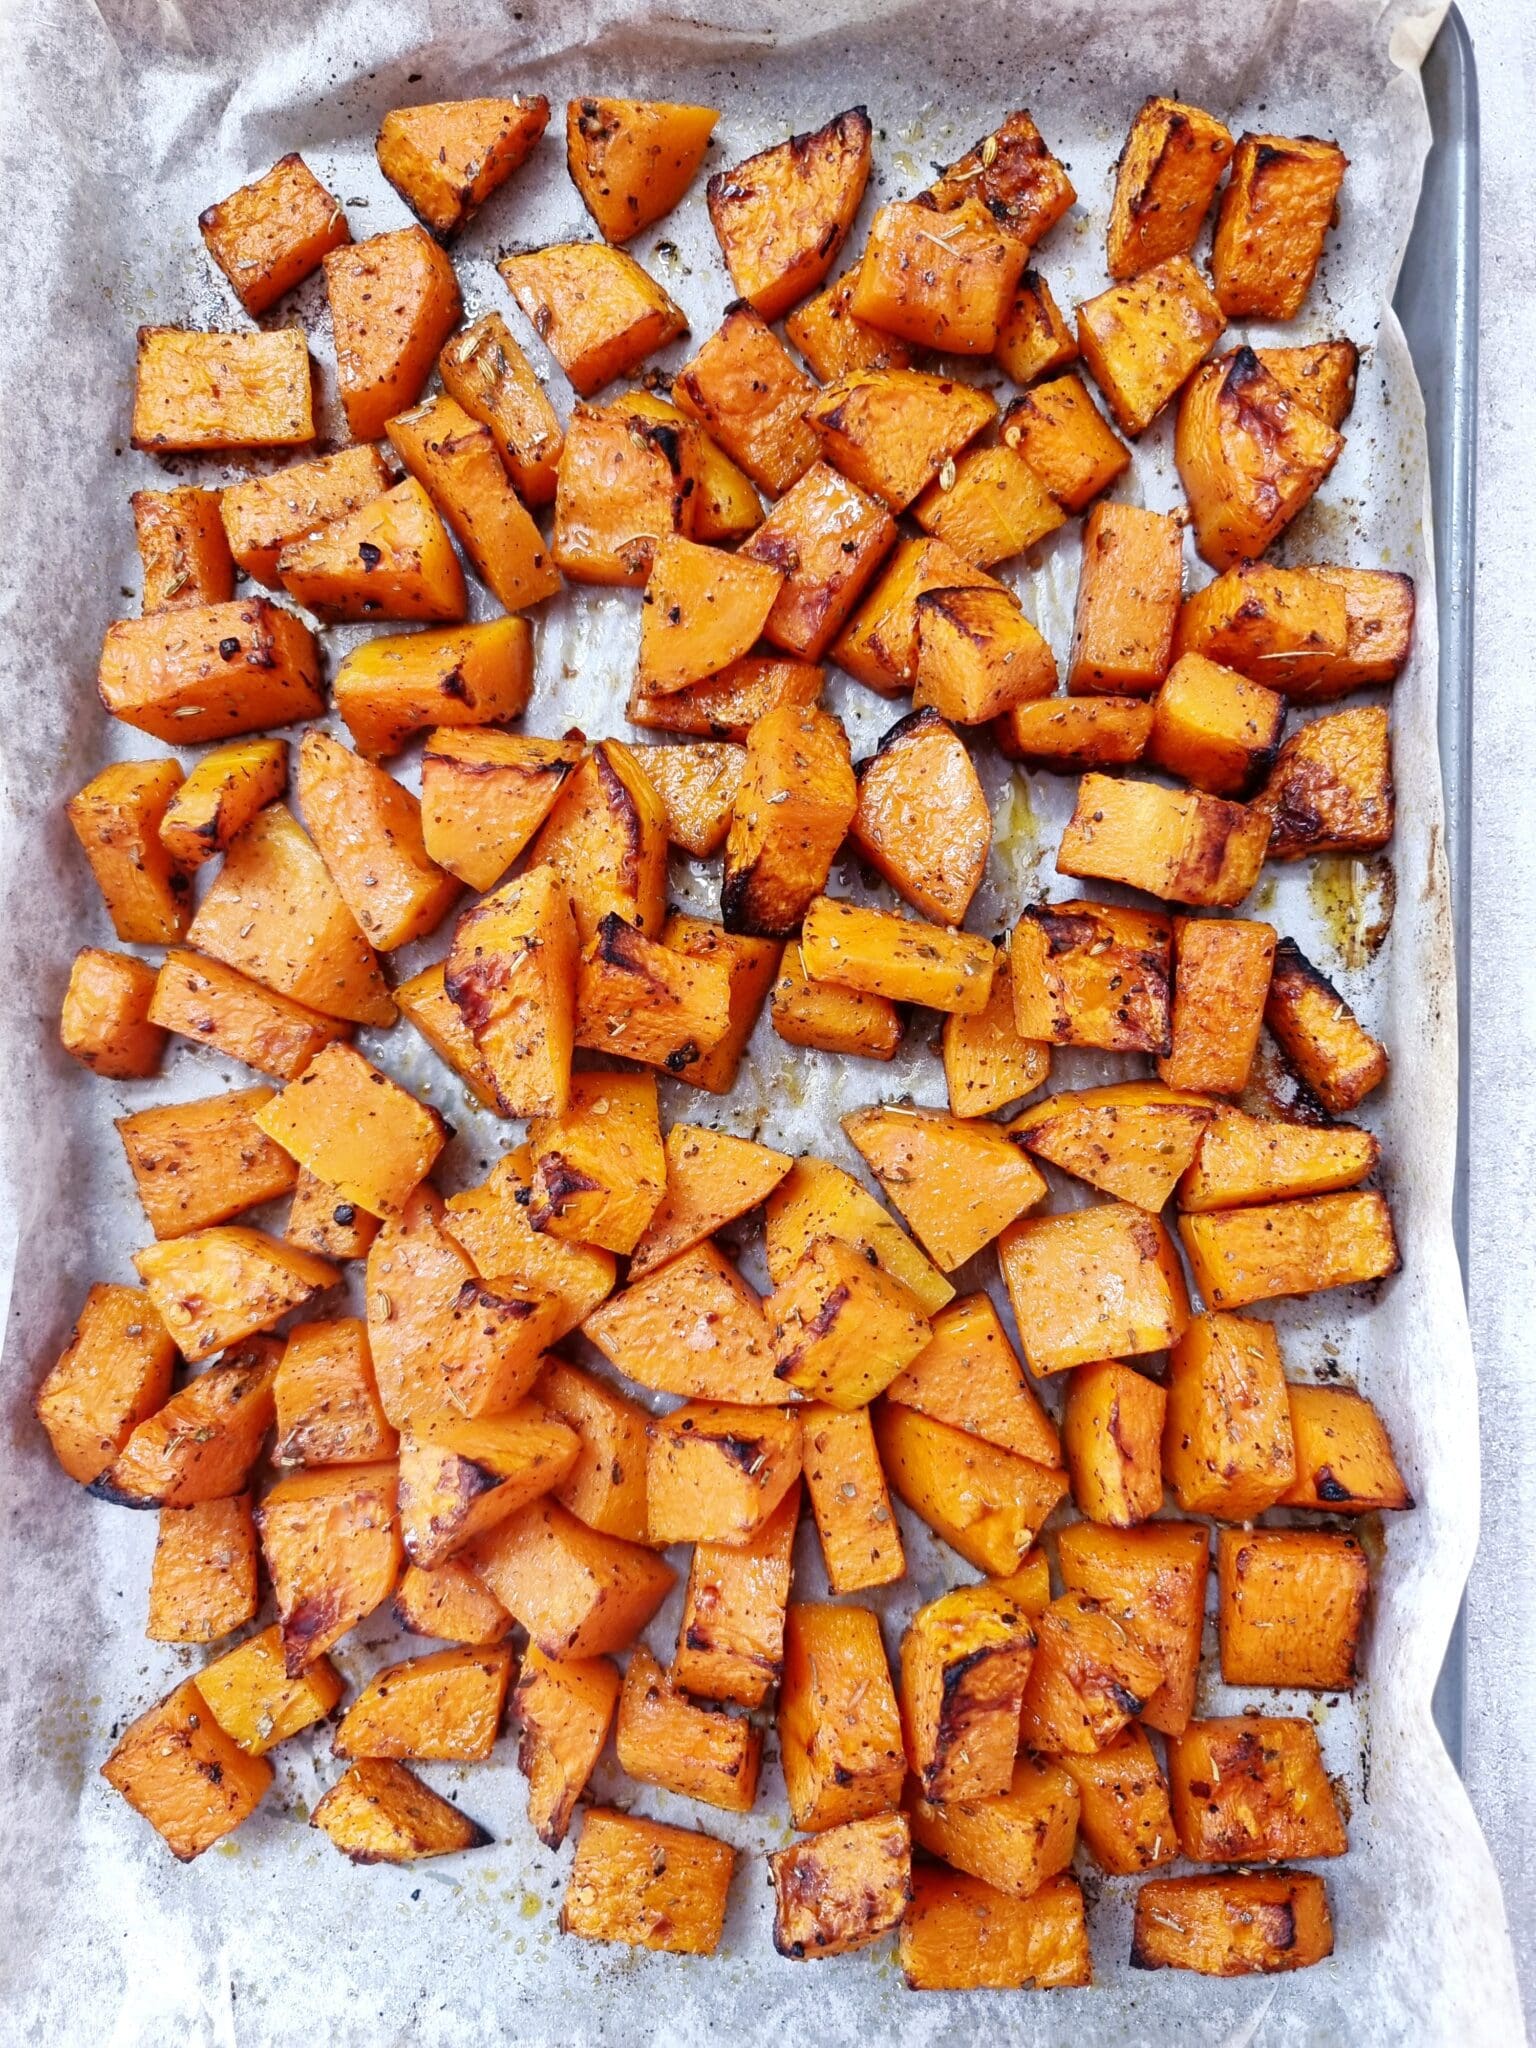 Oven Roasted Butternut With Toasted Fresh Herbs in Olive Oil